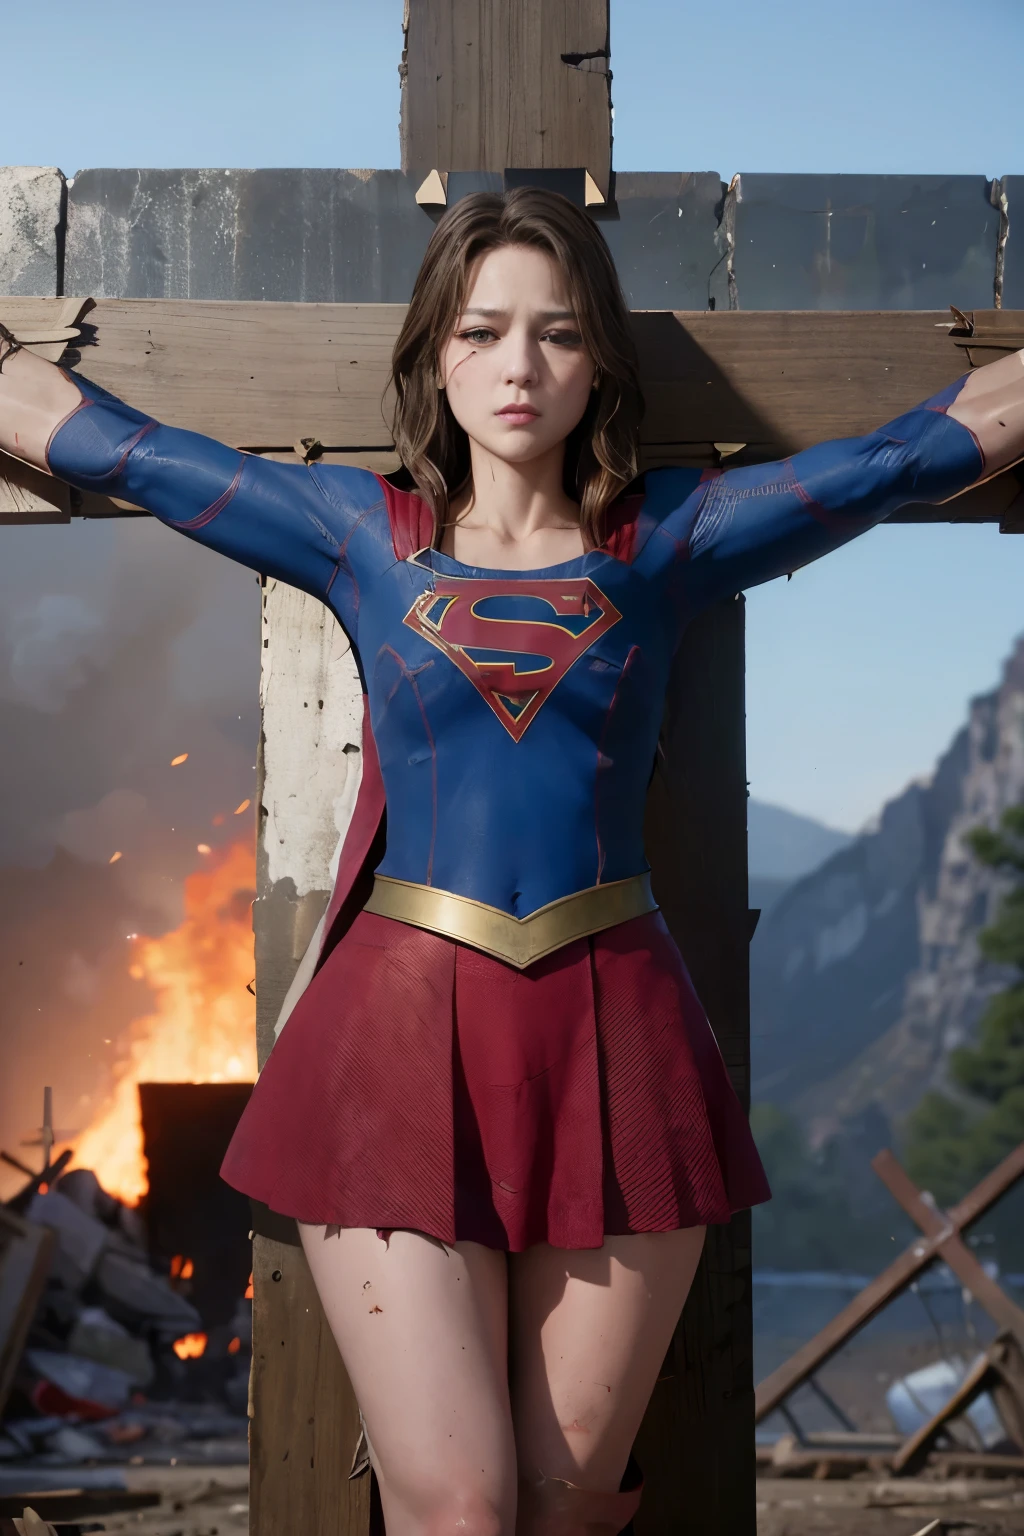 highest quality，masterpiece，uhd, Super detailed, 8k，(Beautiful woman)，(A Beautiful Woman)，((crucifixion:1.5))，((cross))，(execution)，((incontinence))，scared，torture，slave，((Woman in crucifixion at the cross：1.5)),crucifixion刑，((supergirl))，blue suit，Superman logo on chest，red skirt，((torn costume：1.5))，((Tearing of clothes：1.5))，(tattered clothes)，((bruises on body))，scars on body，injured face and body，(Bruise, dirty, torn clothes, revealing clothes, Blood:1.3)，traces of being beaten，Defeated heroine，a devastated world，ruins，abandoned building，(burning at the stake)，((roasted over fire：1.2))